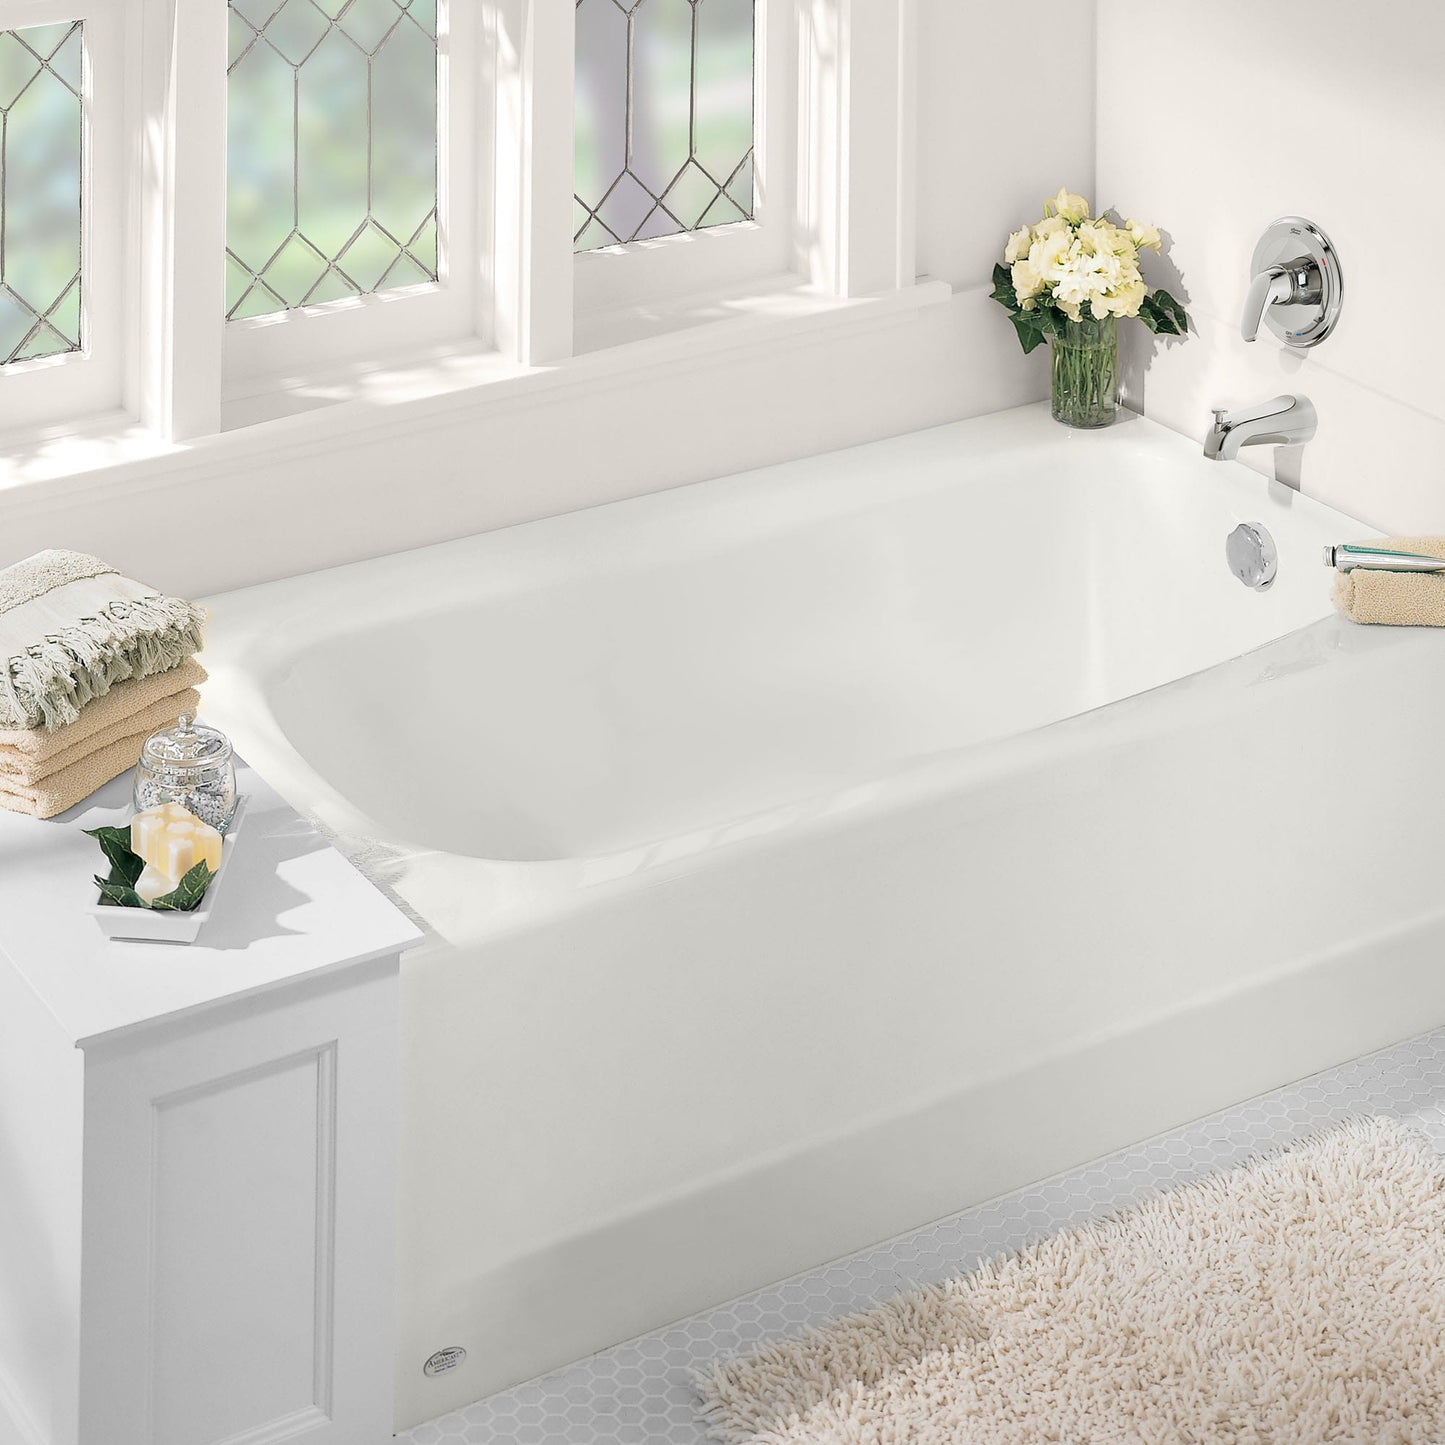 Cambridge Americast 60" x 32" Integral Apron Bathtub With Right-Hand Outlet